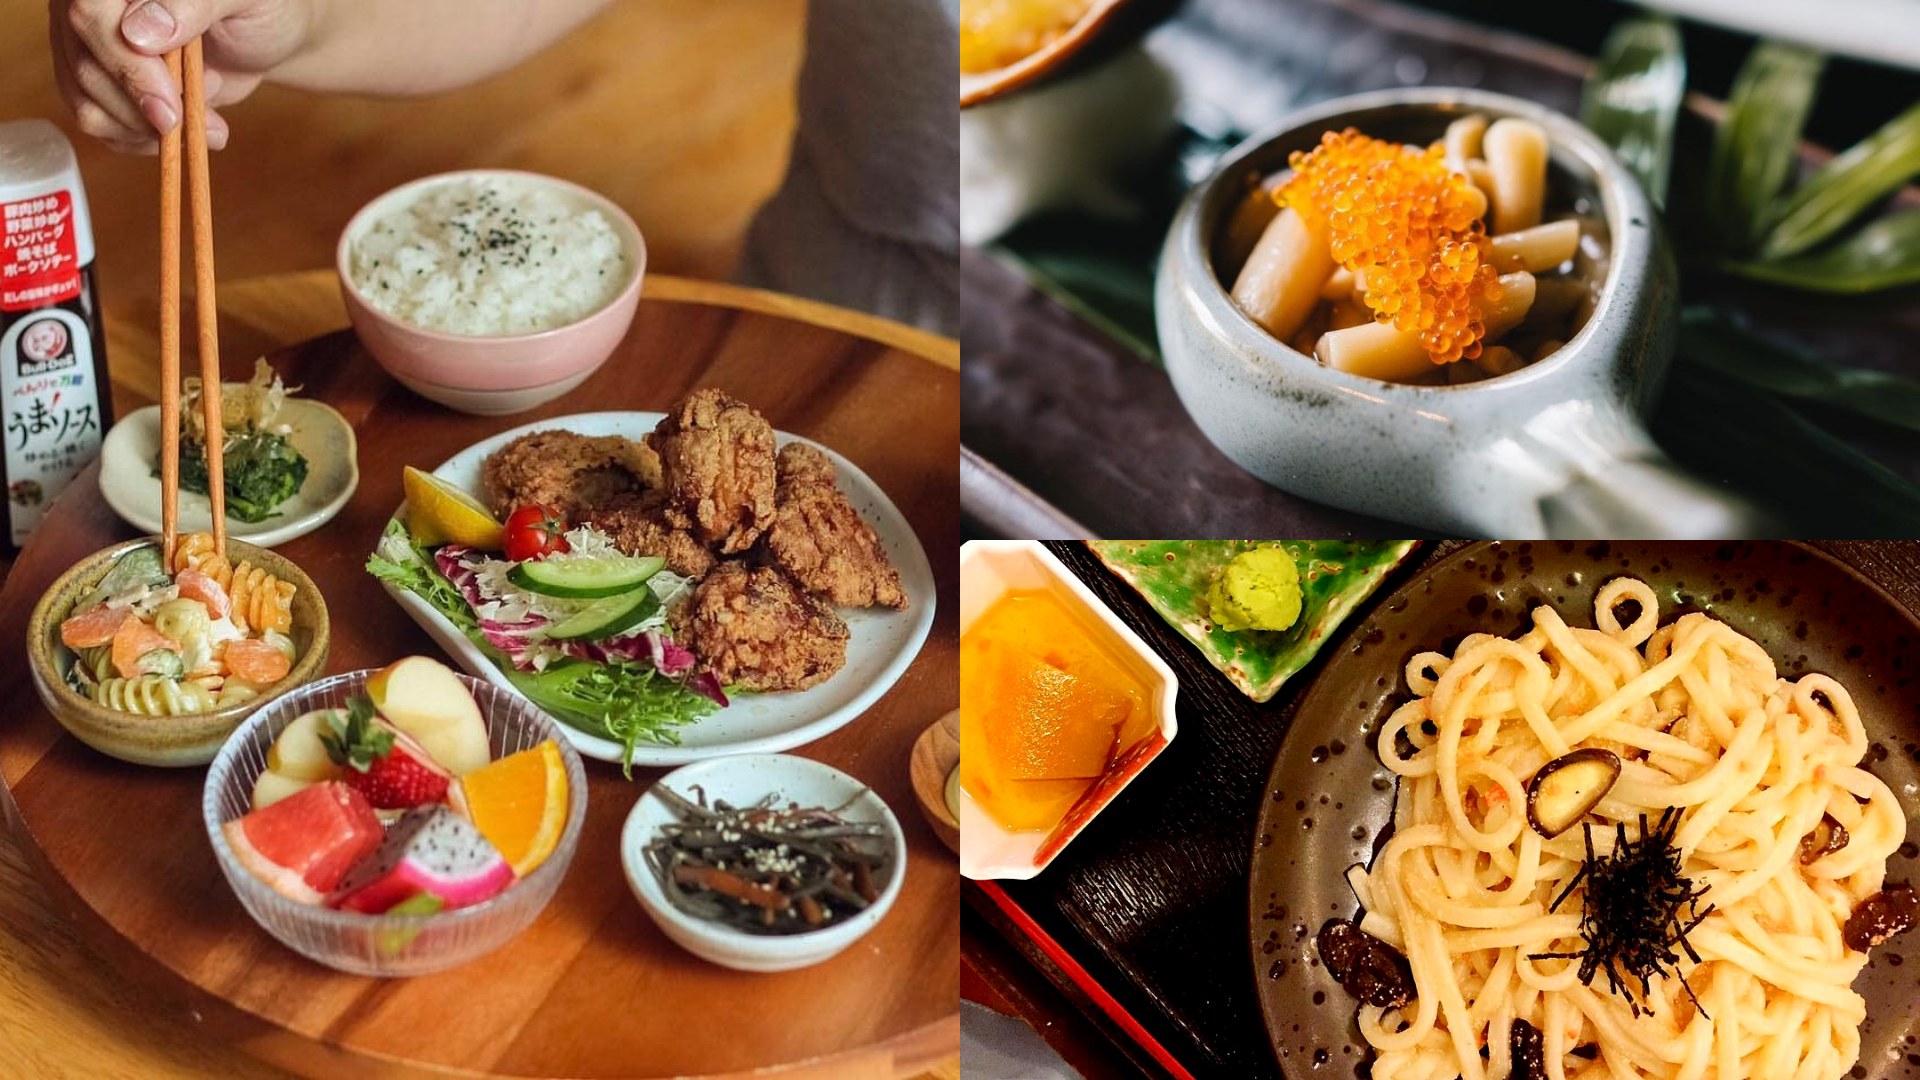 19 Authentic Japanese Restaurants In KL With The Best Sushi, Omakase